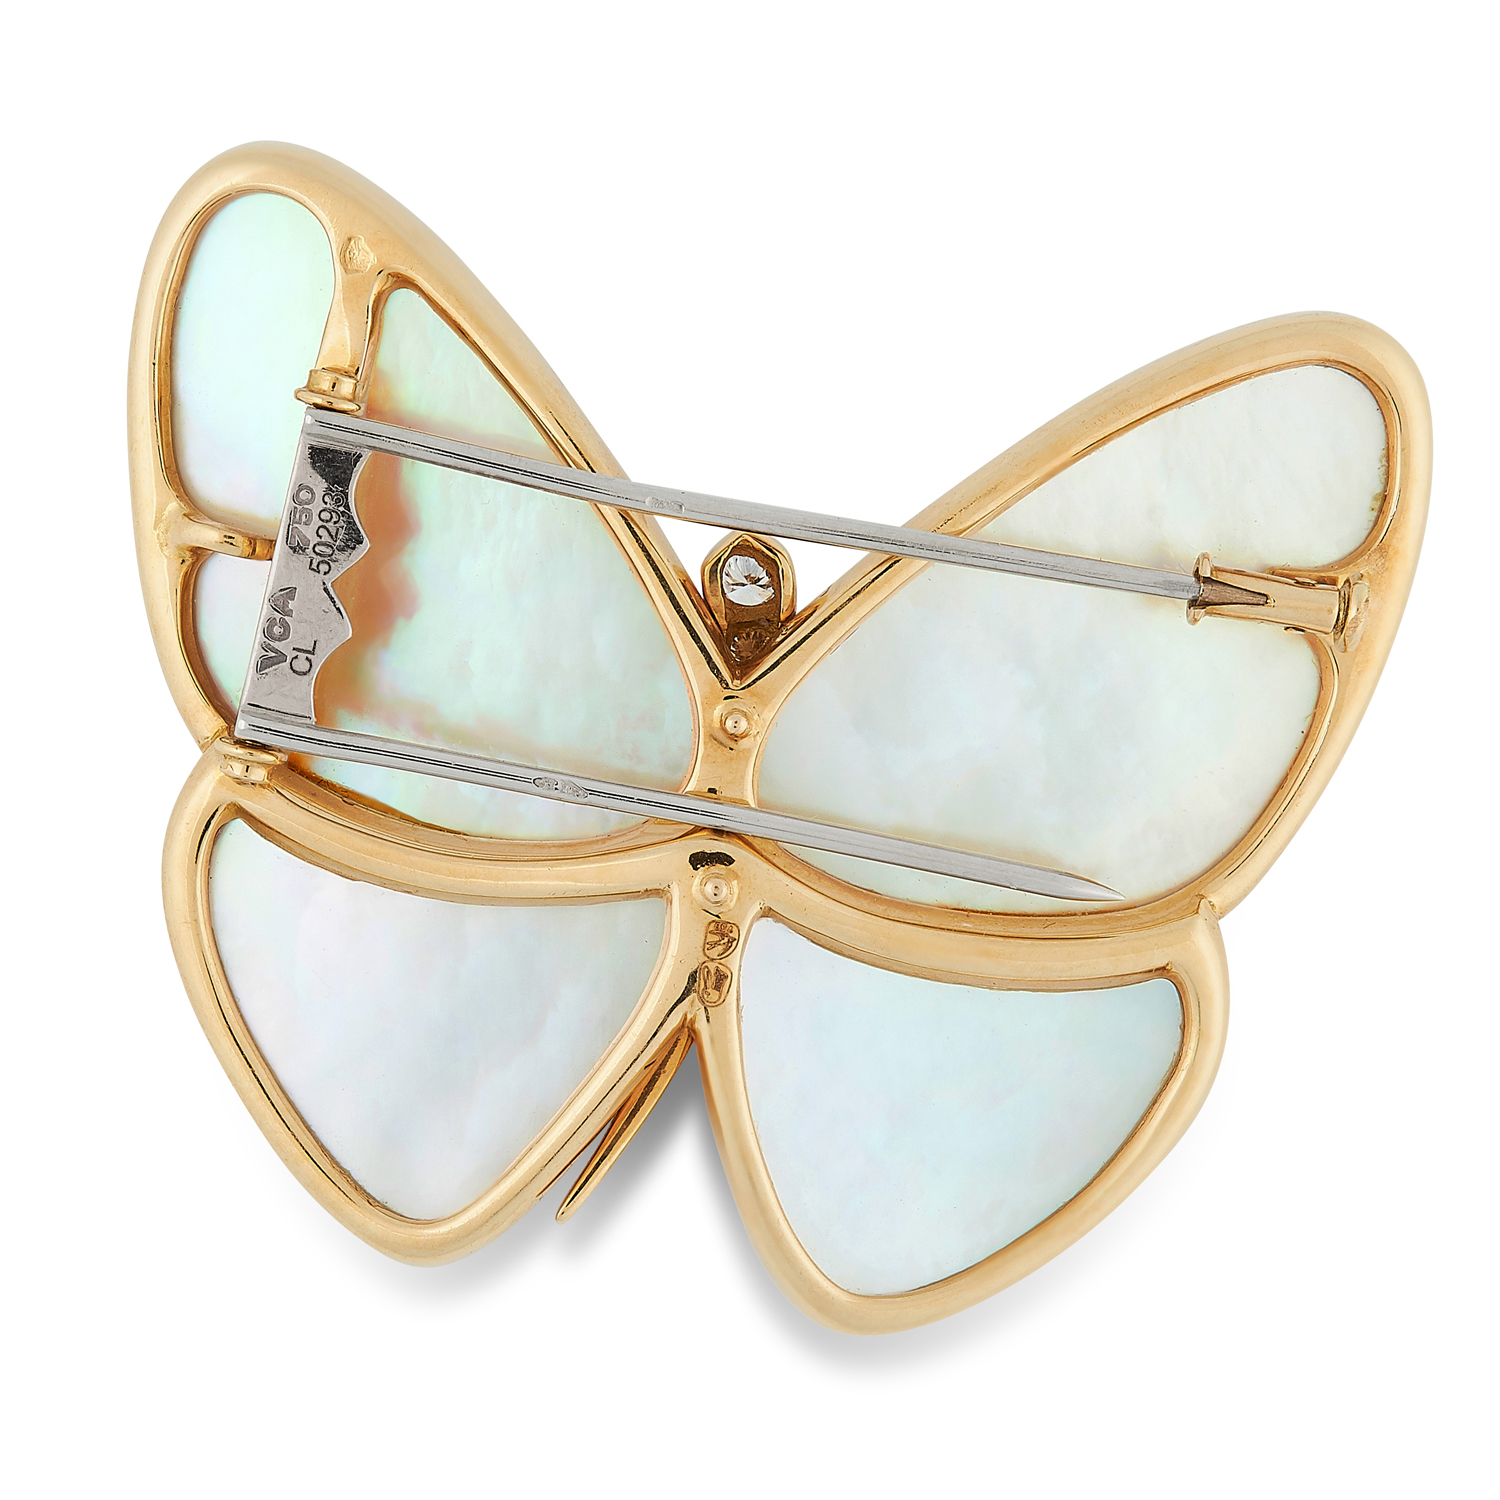 A MOTHER OF PEARL AND DIAMOND BUTTERFLY BROOCH, VAN CLEEF & ARPELS in 18ct yellow gold, designed - Image 2 of 2